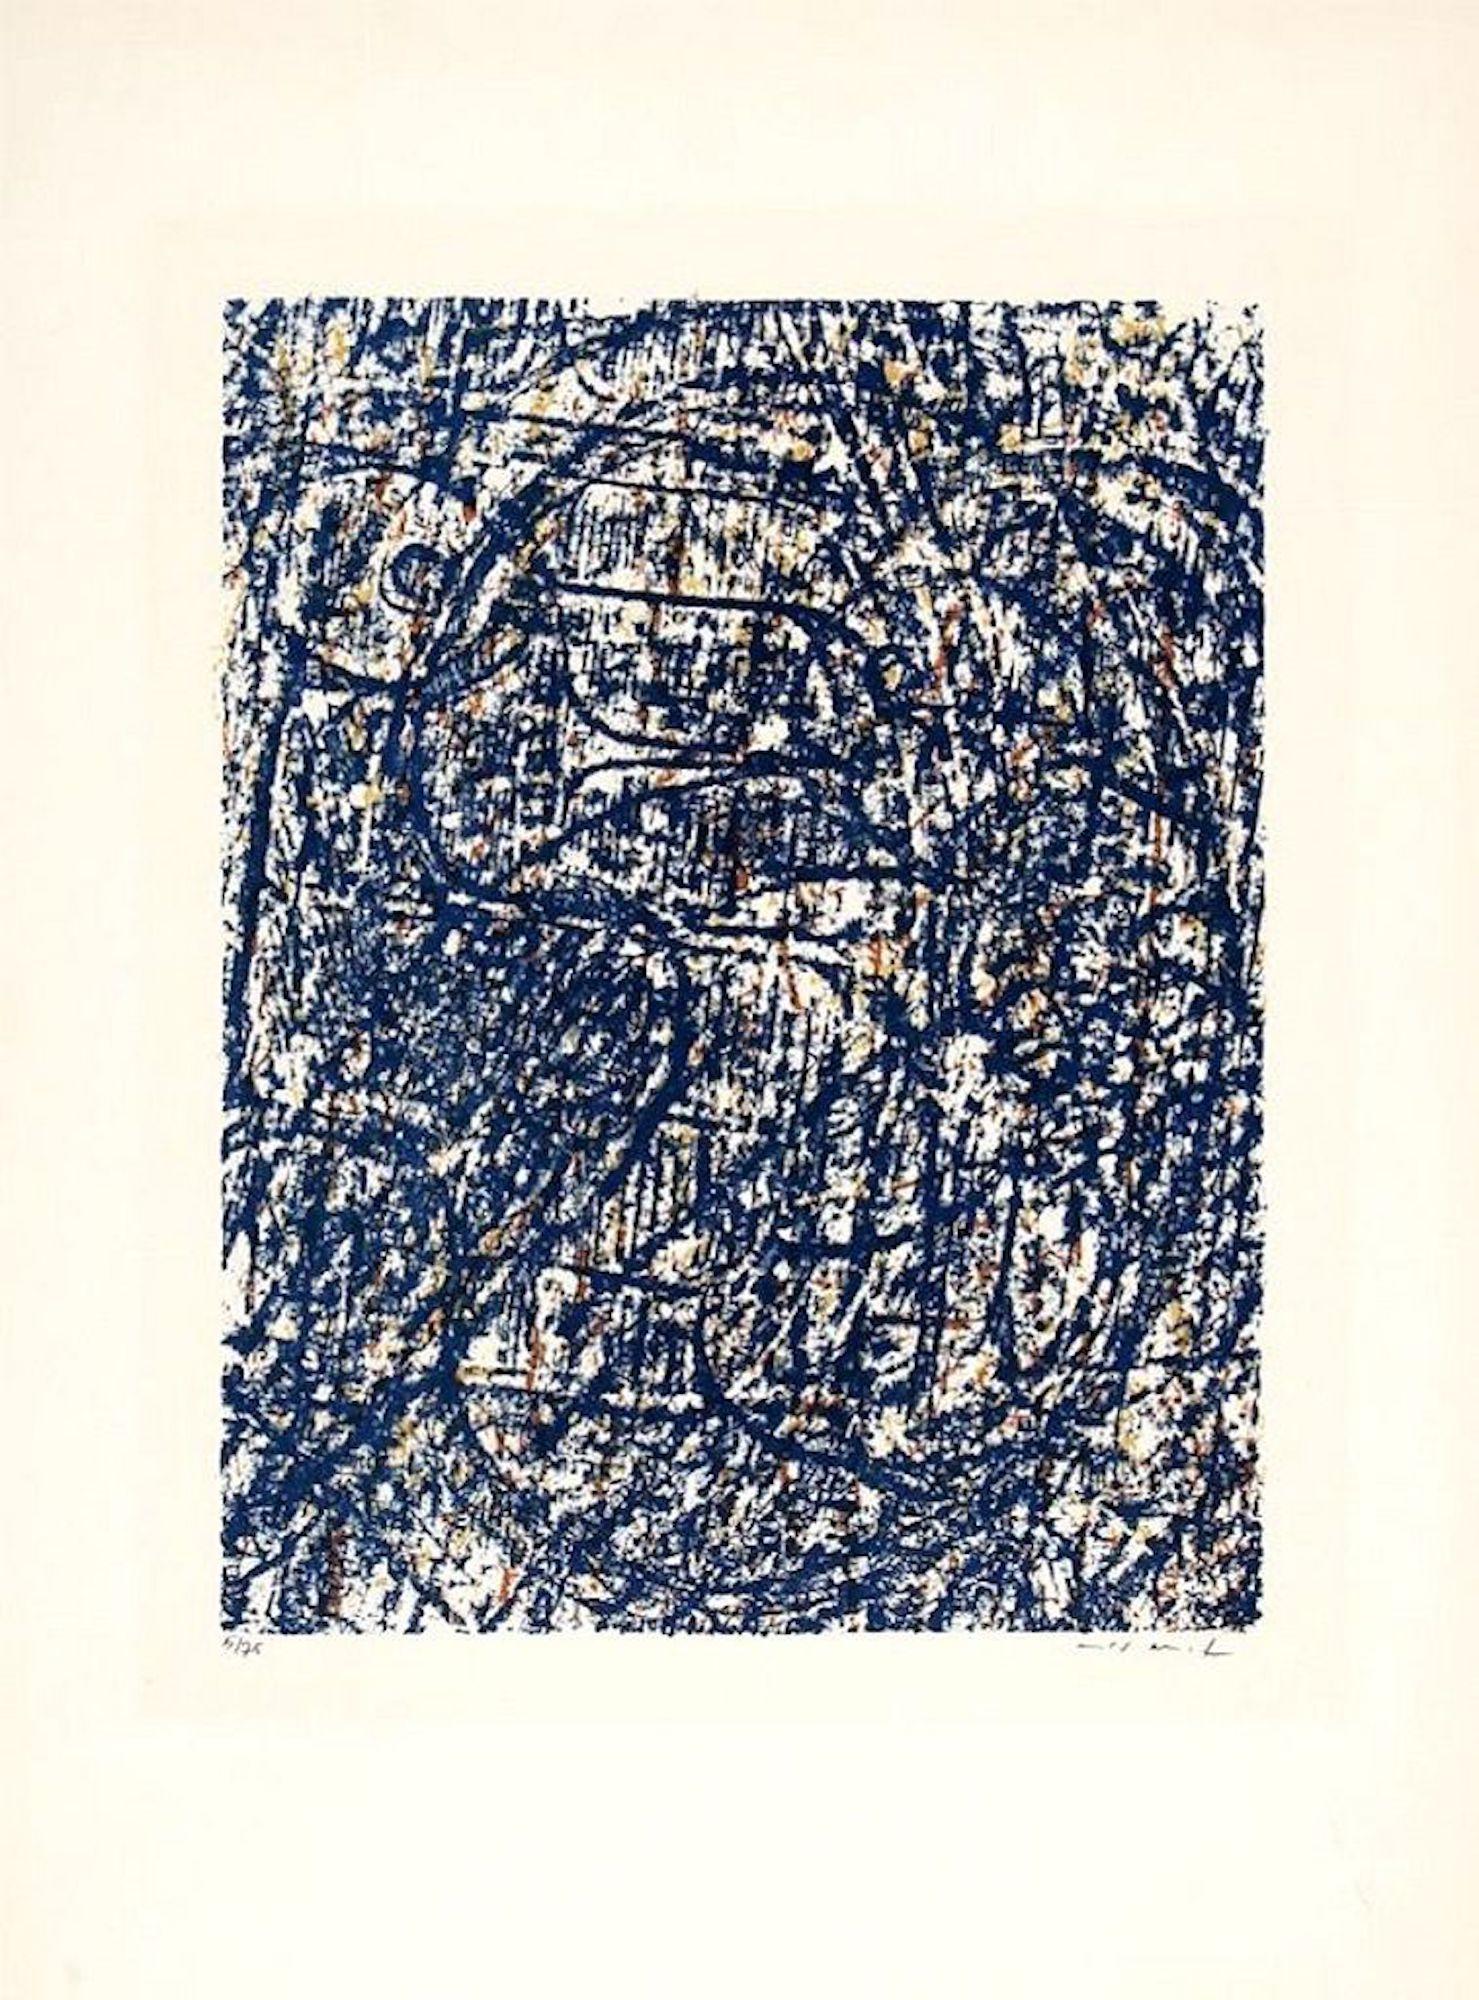 Image dimensions: 31 x 24.5 cm.

La Fôret Blueu is a wonderful color lithograph on paper realized in 1962 by the Surrealist artist, Max Ernst  (Brühl, 1891 – Paris, 1976).

Reference: Spies / Leppien 89.

Signed, dated and numbered in pencil, at the